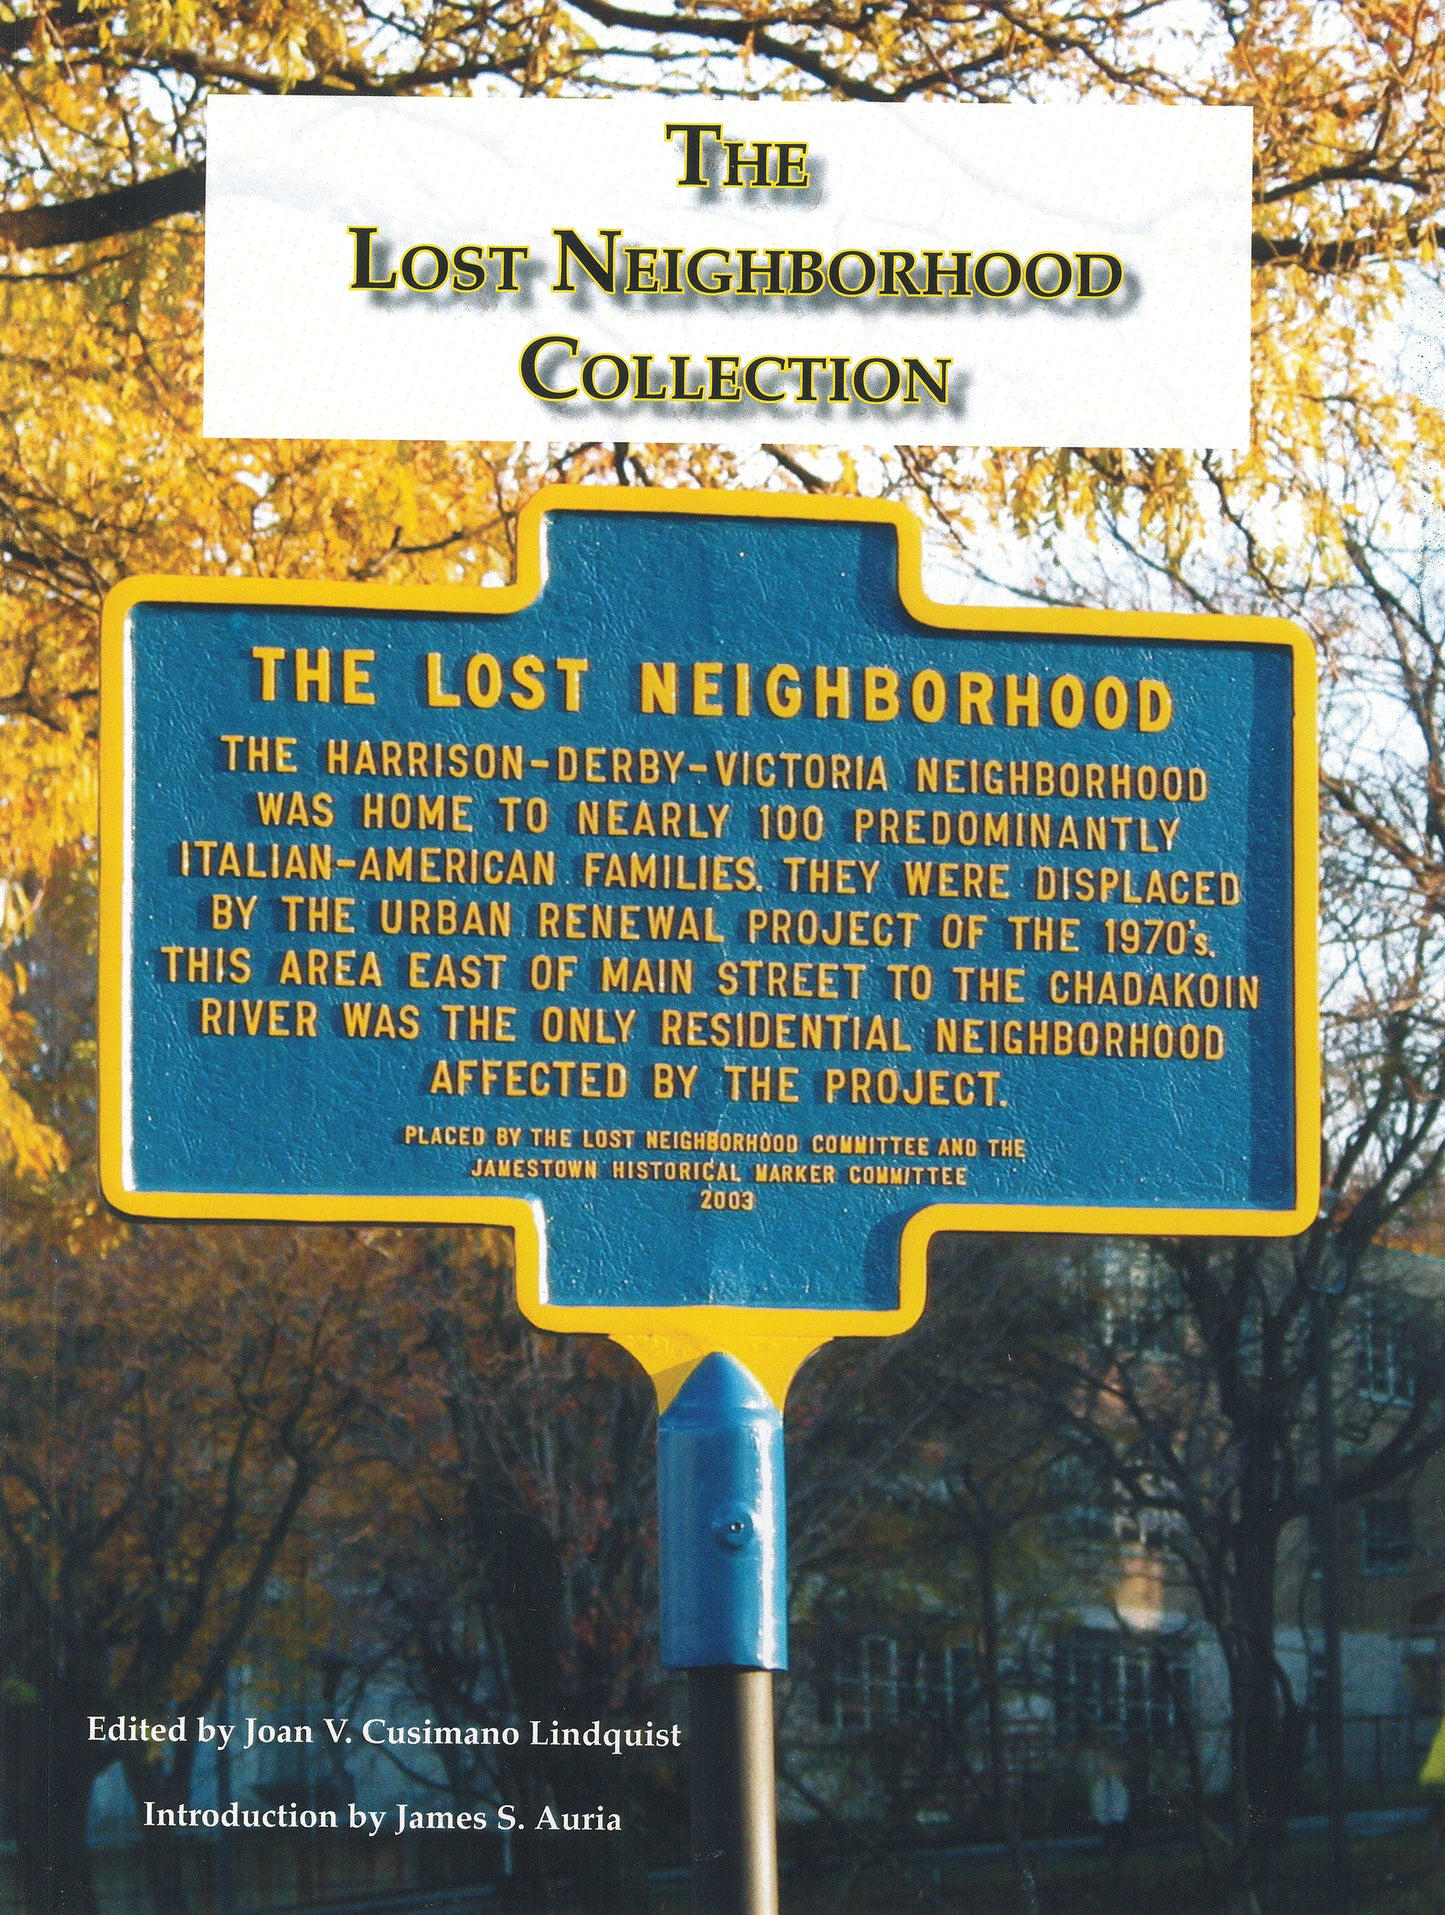 The Lost Neighborhood Collection